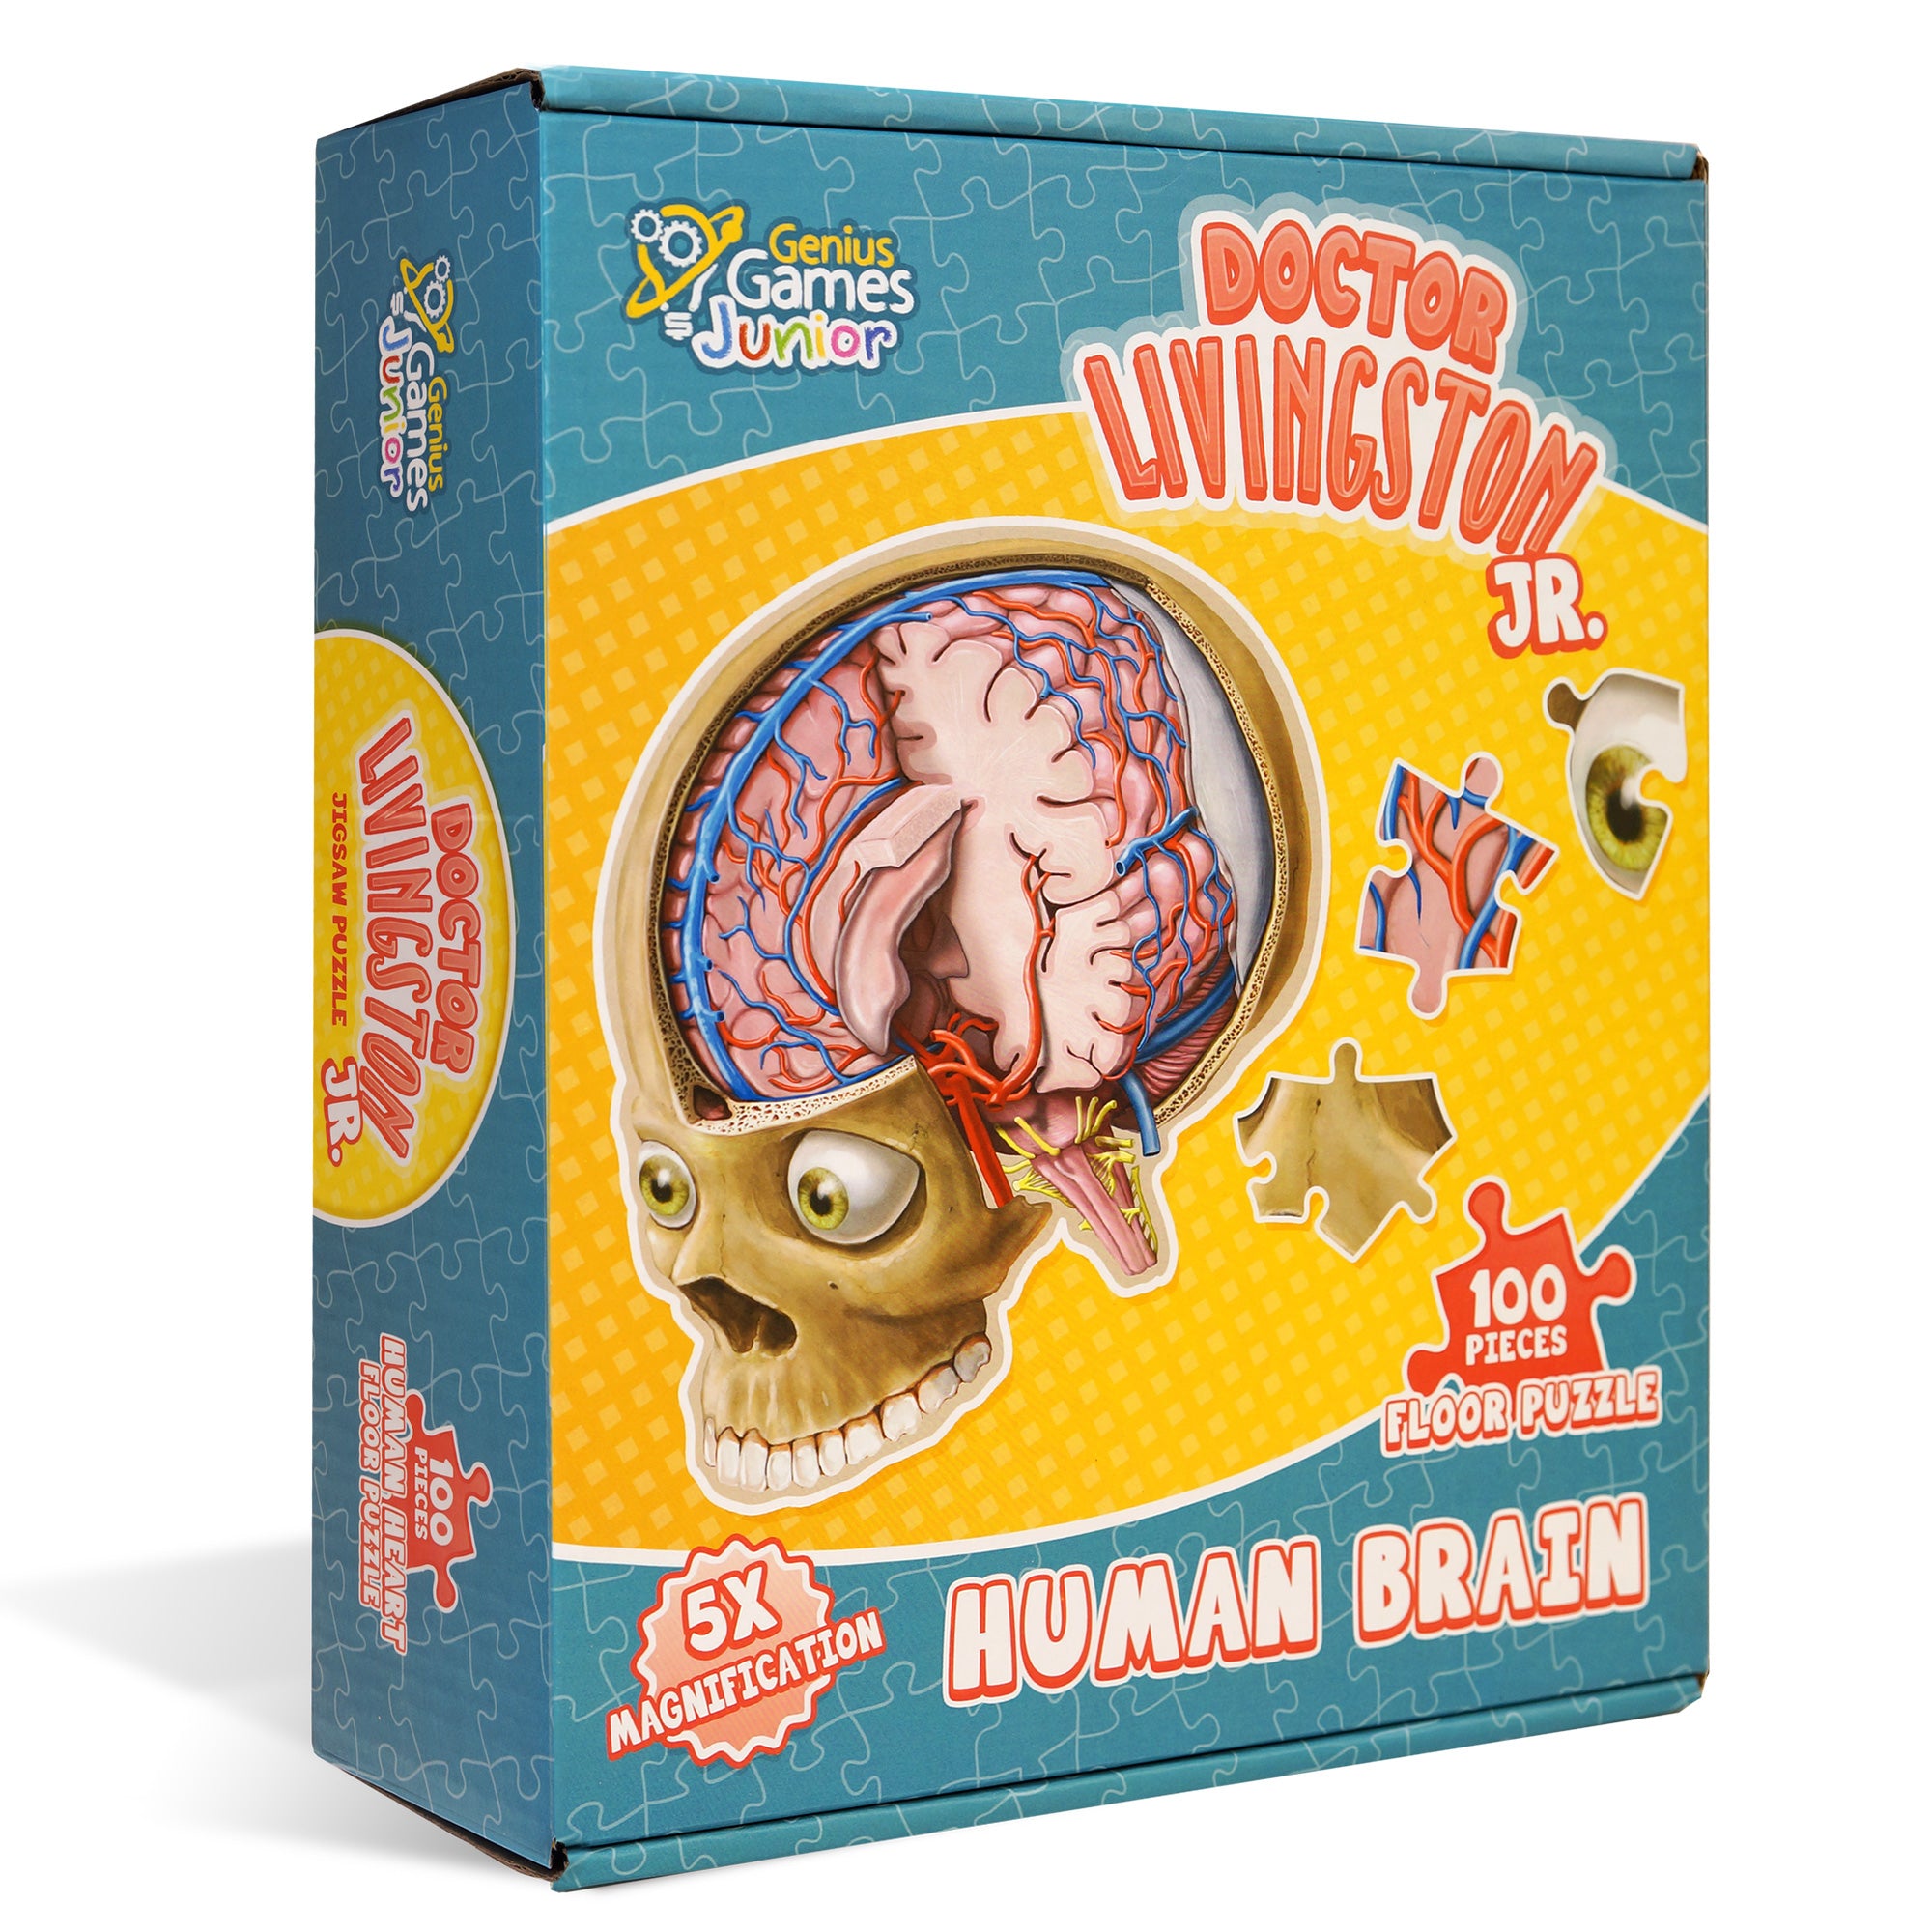 Human Feet Anatomy Jigsaw Puzzle | Dr. Livingston's Unique Shaped Science  Puzzles